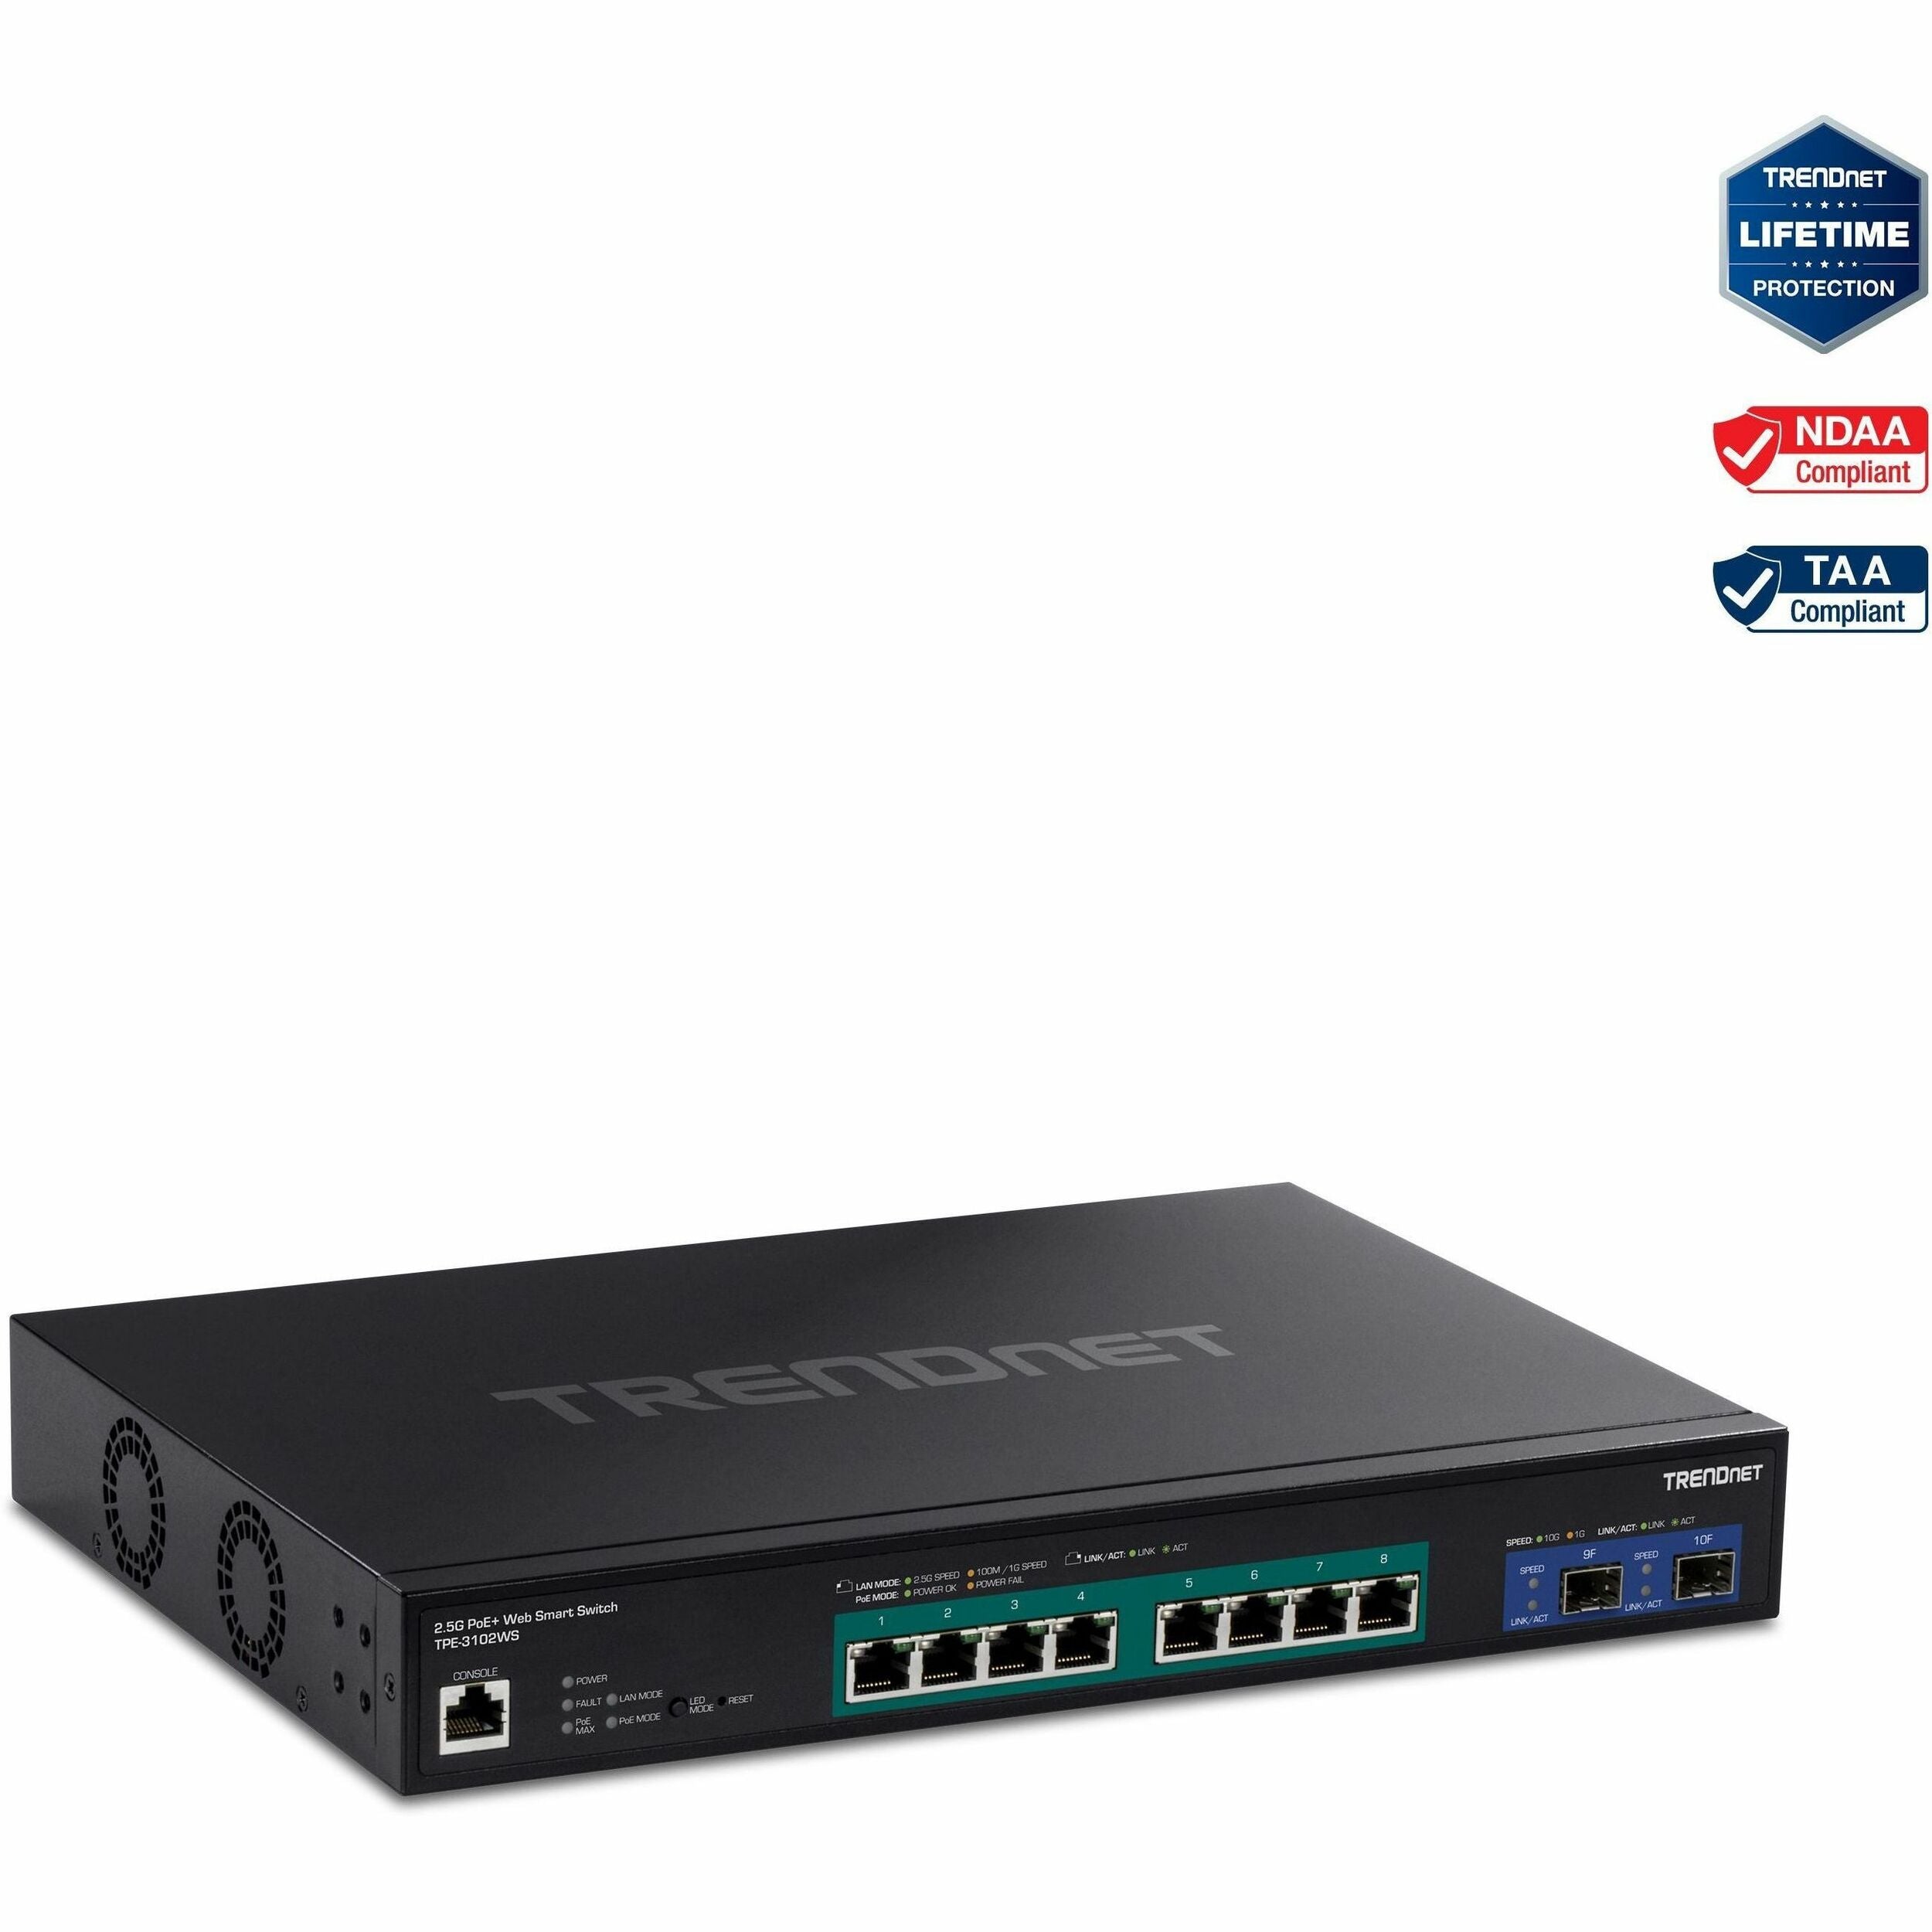 TRENDnet 10-Port Multi-Gig Web Smart PoE+ Switch, 8 x 2.5GBASE-T PoE+ Ports, 2 x 10G SFP+ Slots, Metal Housing, Managed Network Ethernet Switch, Lifetime Protection, Black, TPE-3102WS - TPE-3102WS